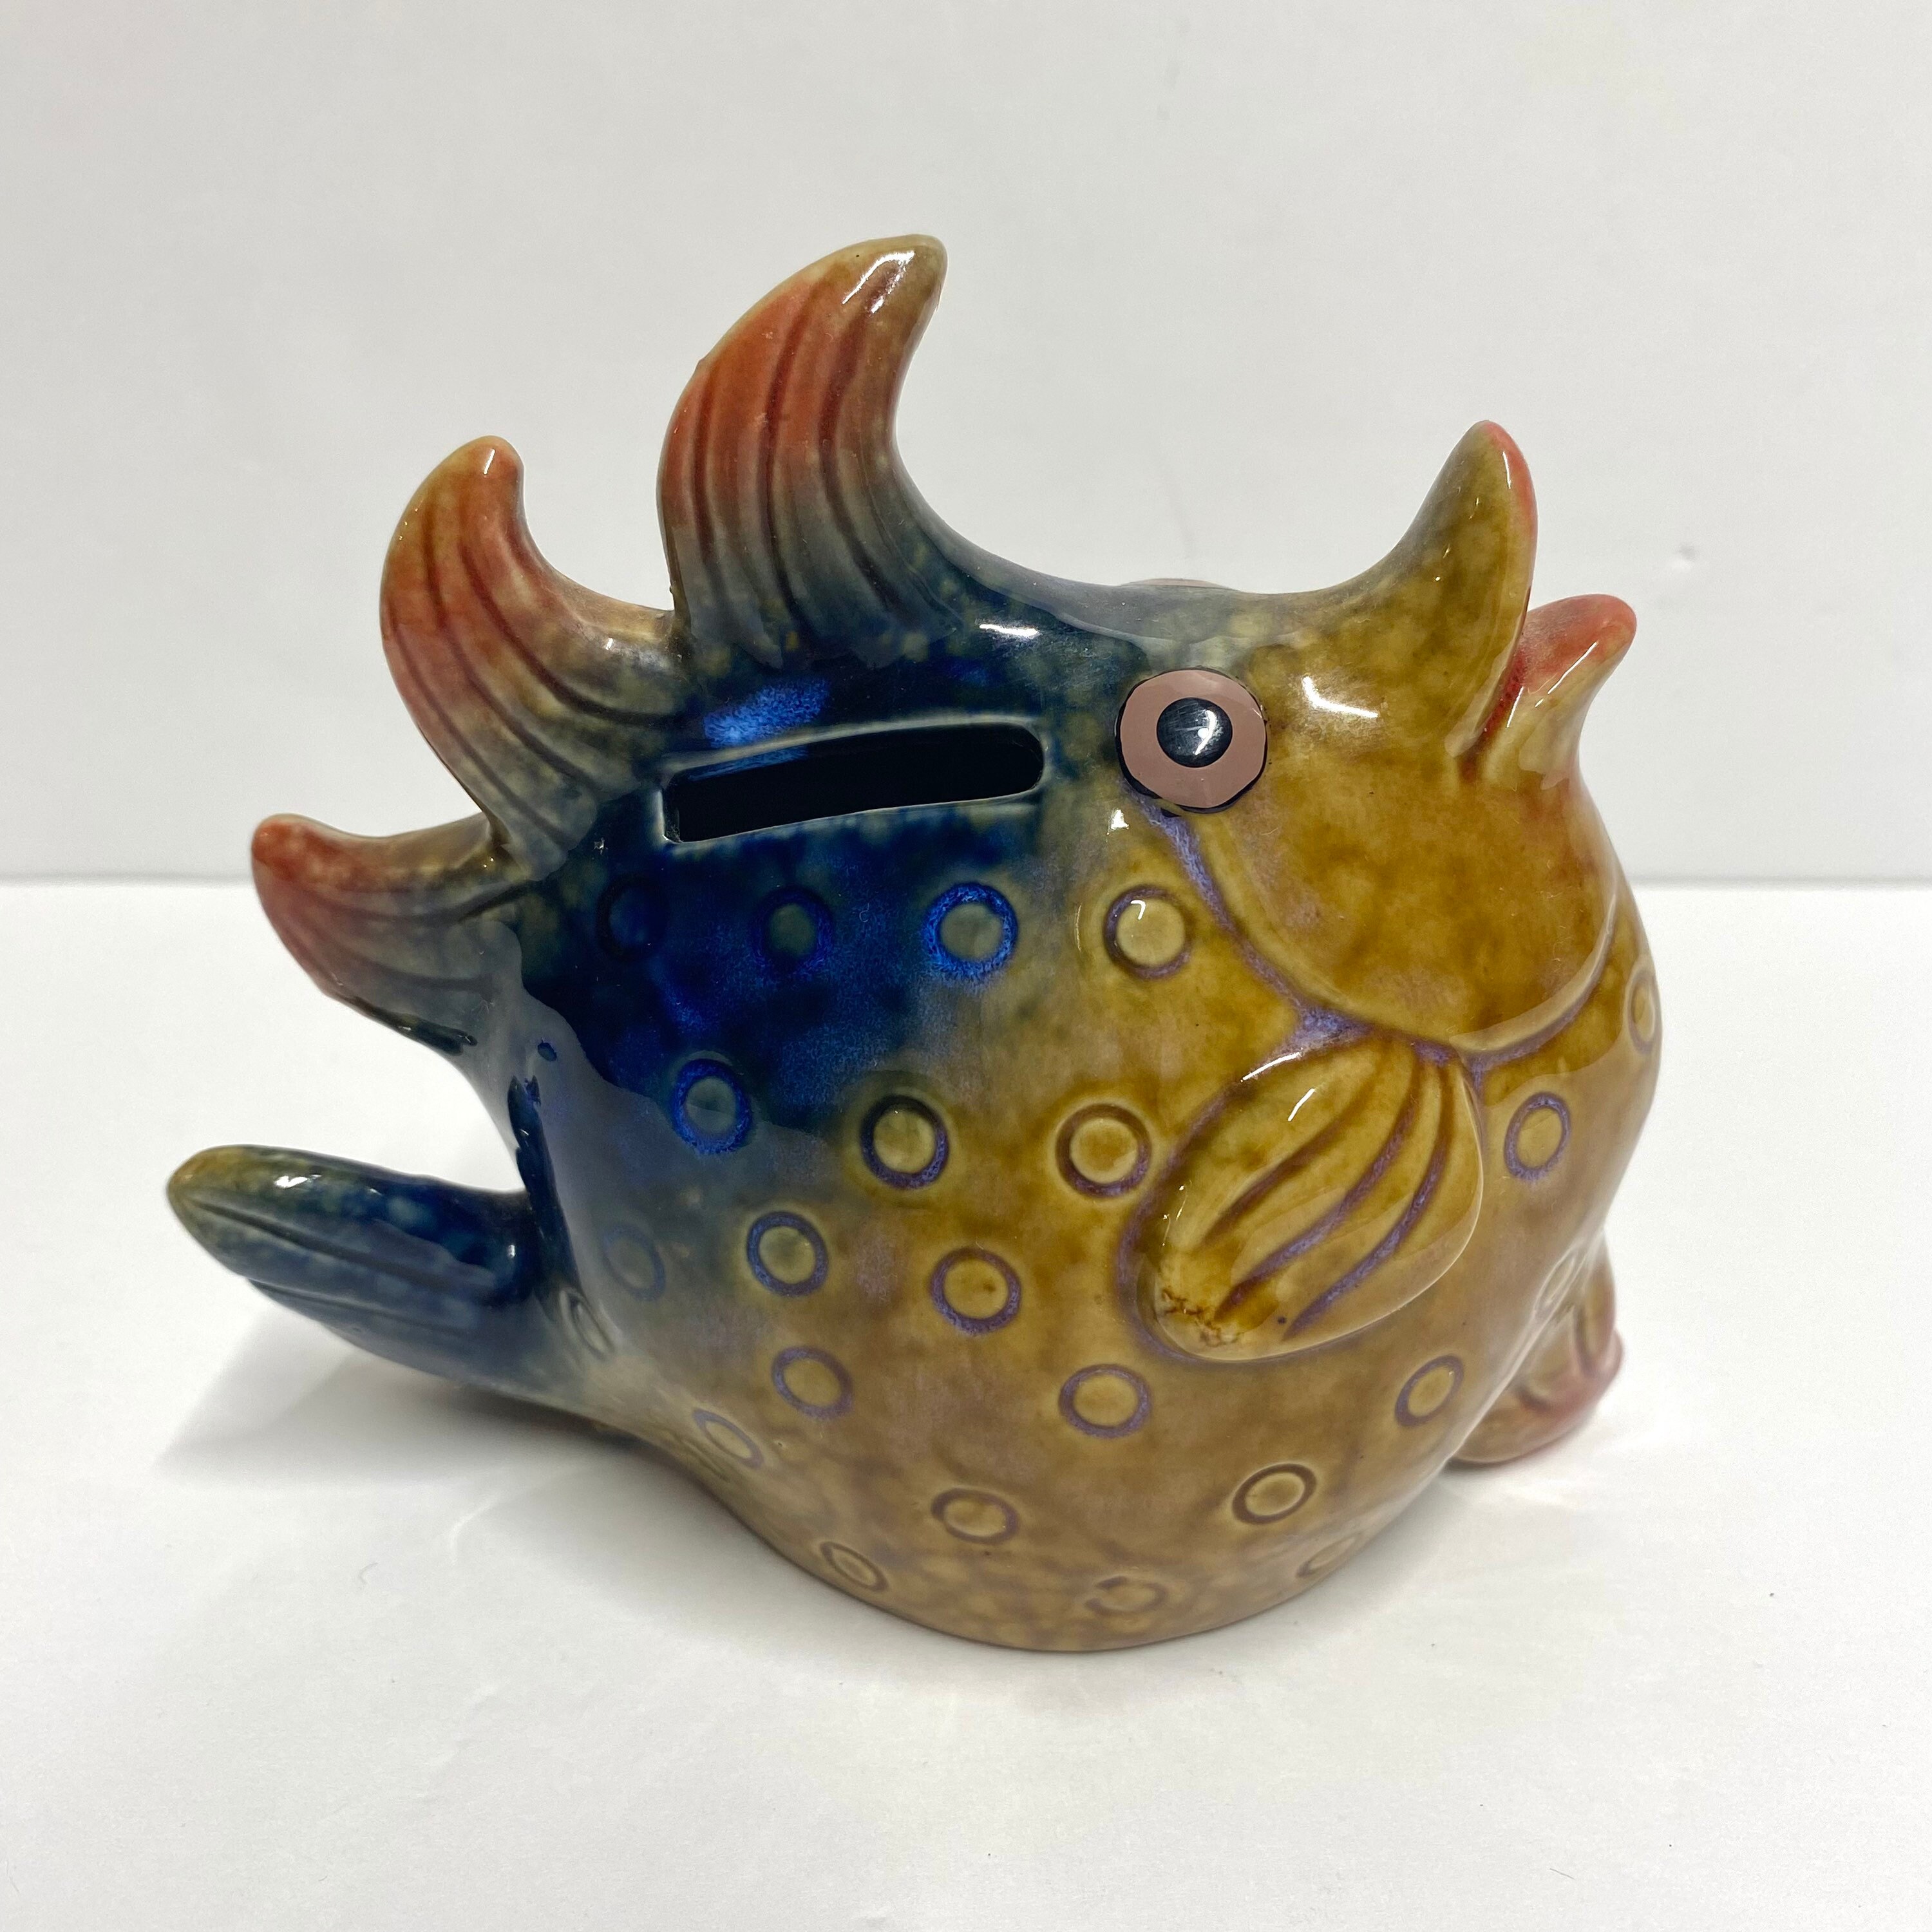 Vintage Ceramic Fish Piggy Bank Coin Bank Brown, Blue and Red